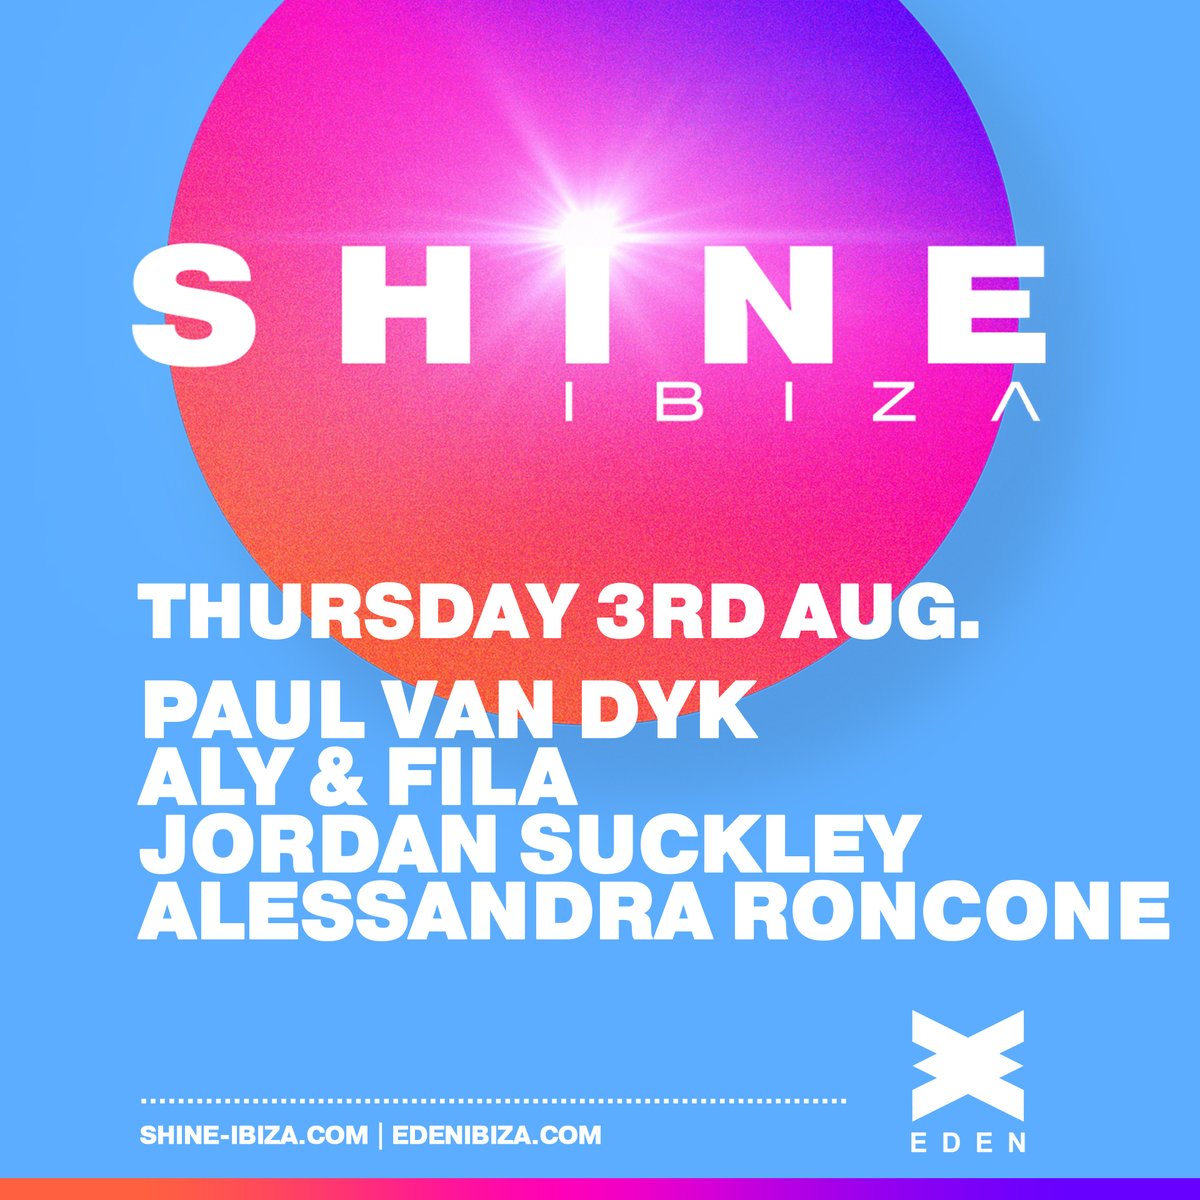 Sparkling through the night with @alyandfila @jordansuckley and @RonconeOfficial August 3rd at @SHINE_Ibiza
👉 swipe.fm/shine-ibiza
#Ibiza #SHINEIbiza